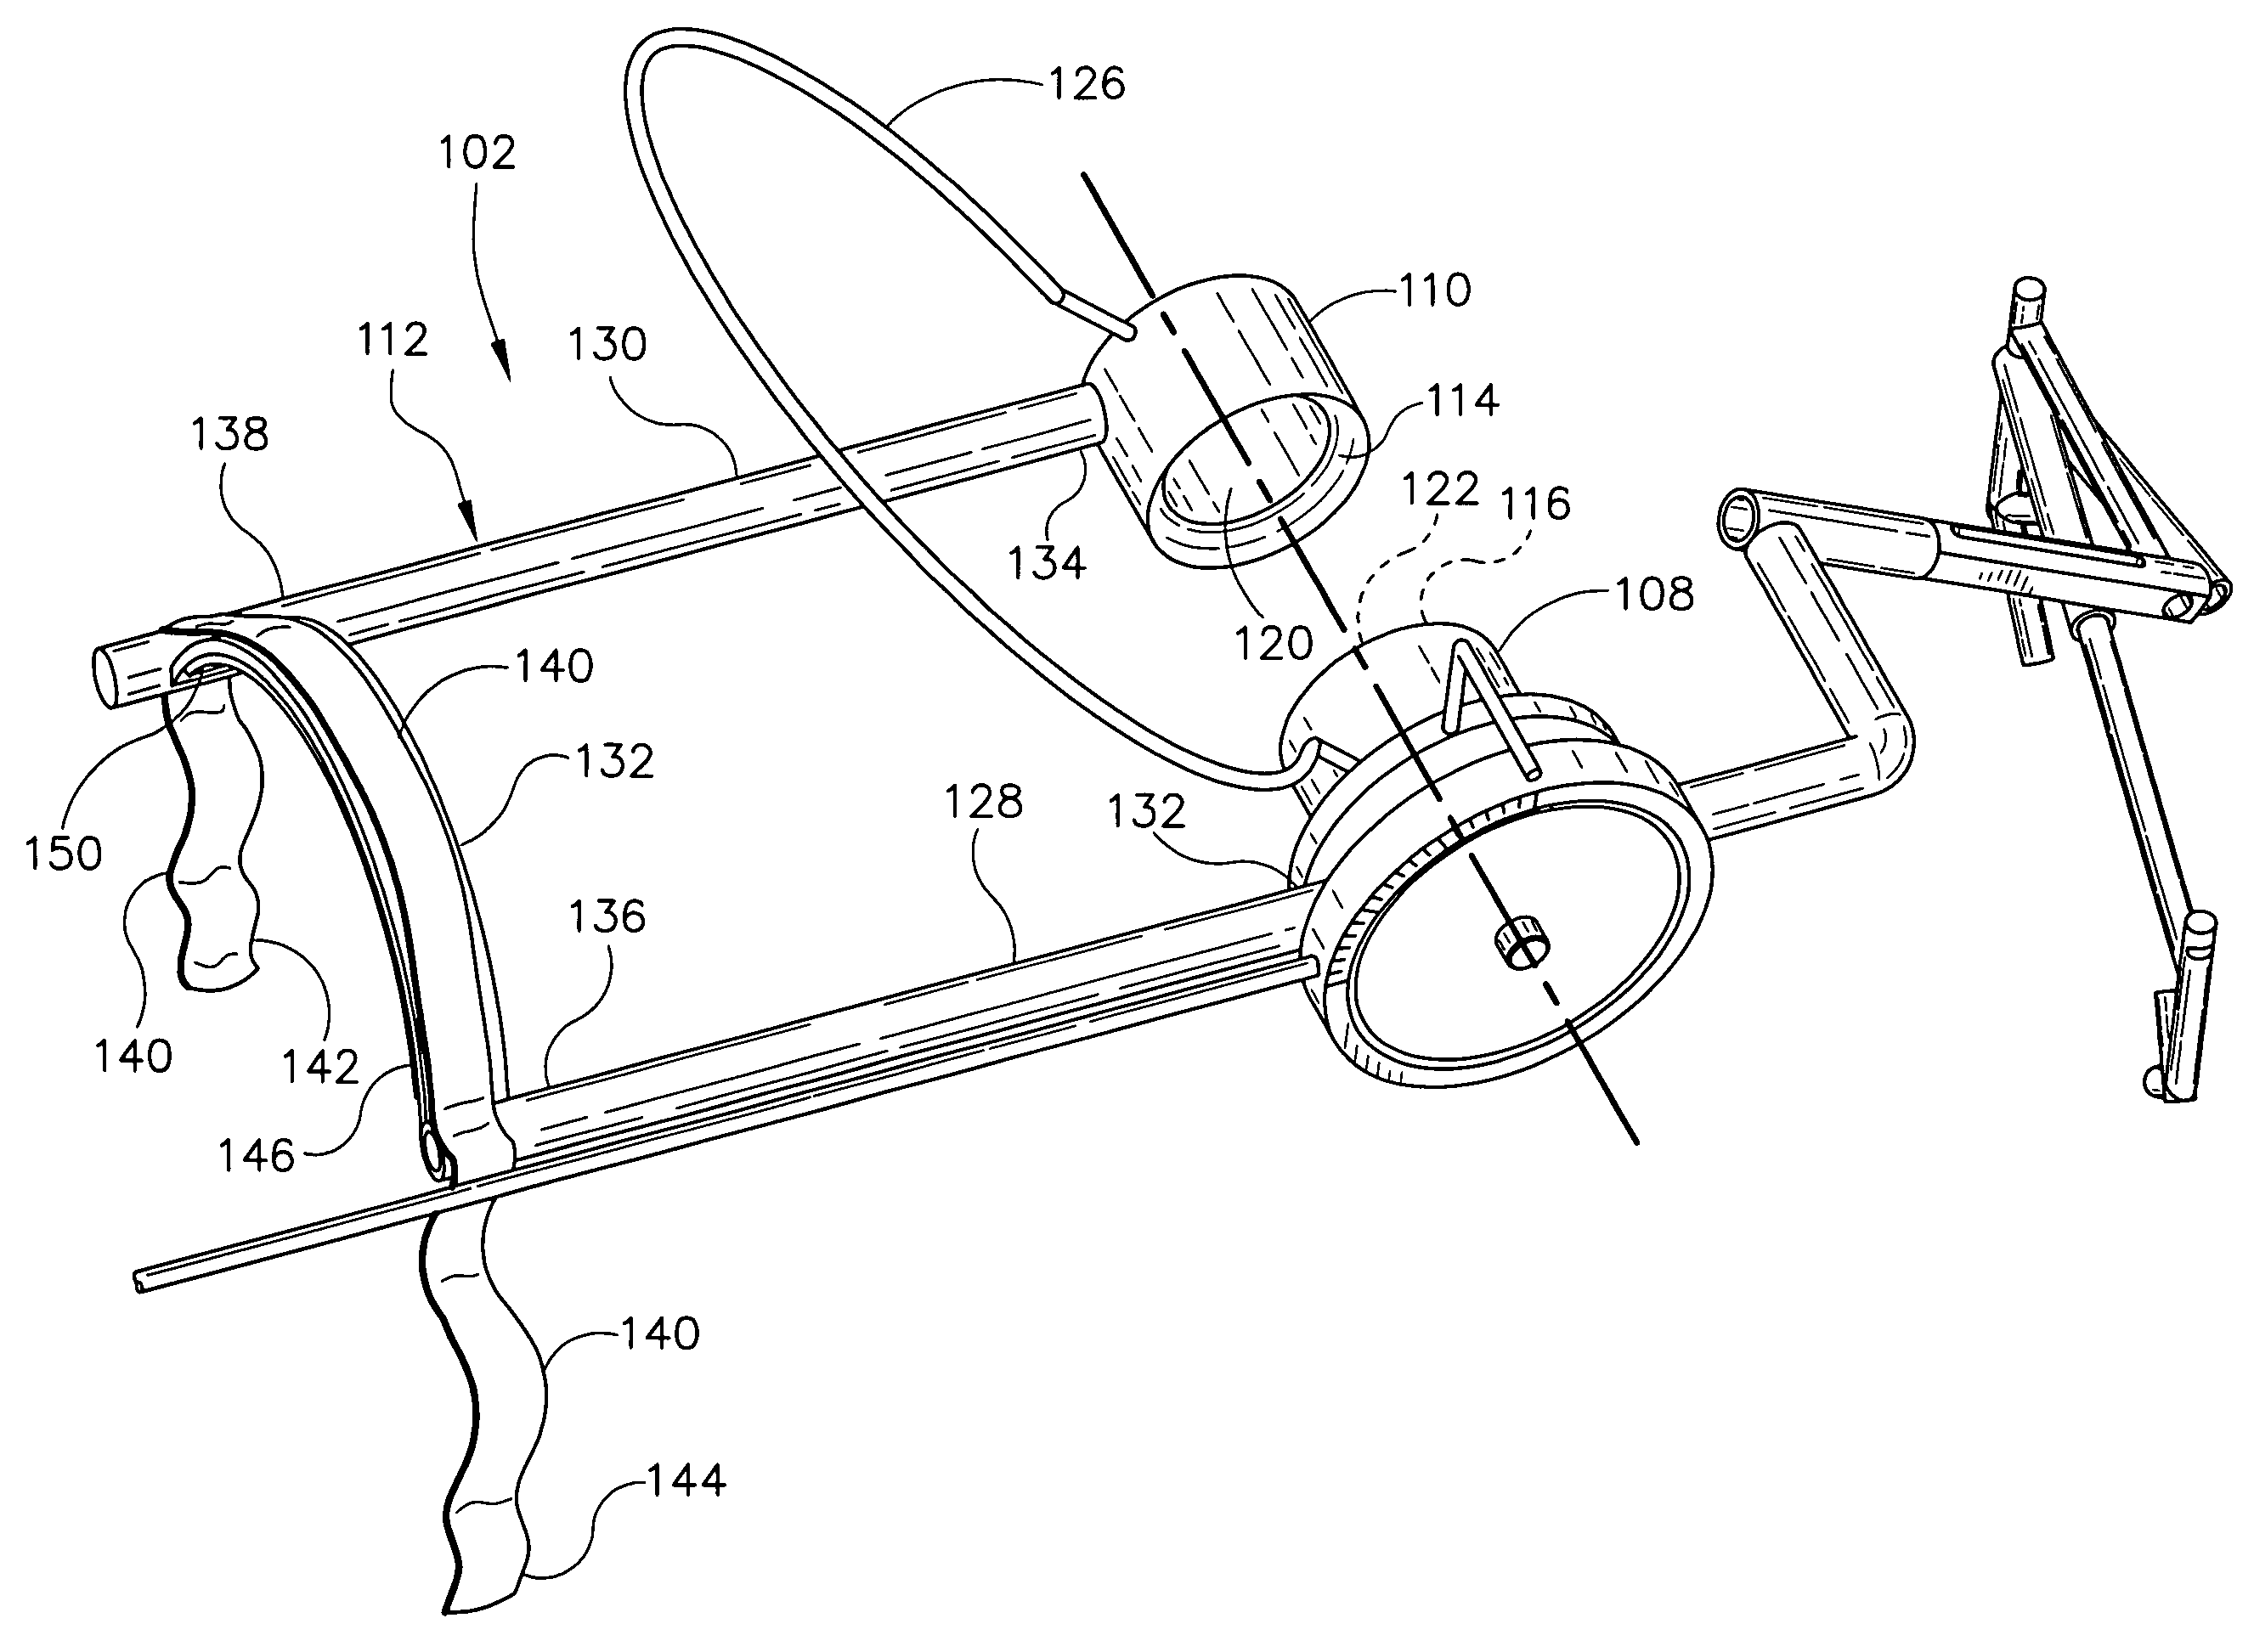 Method and apparatus for determining a dorsiflexion angle